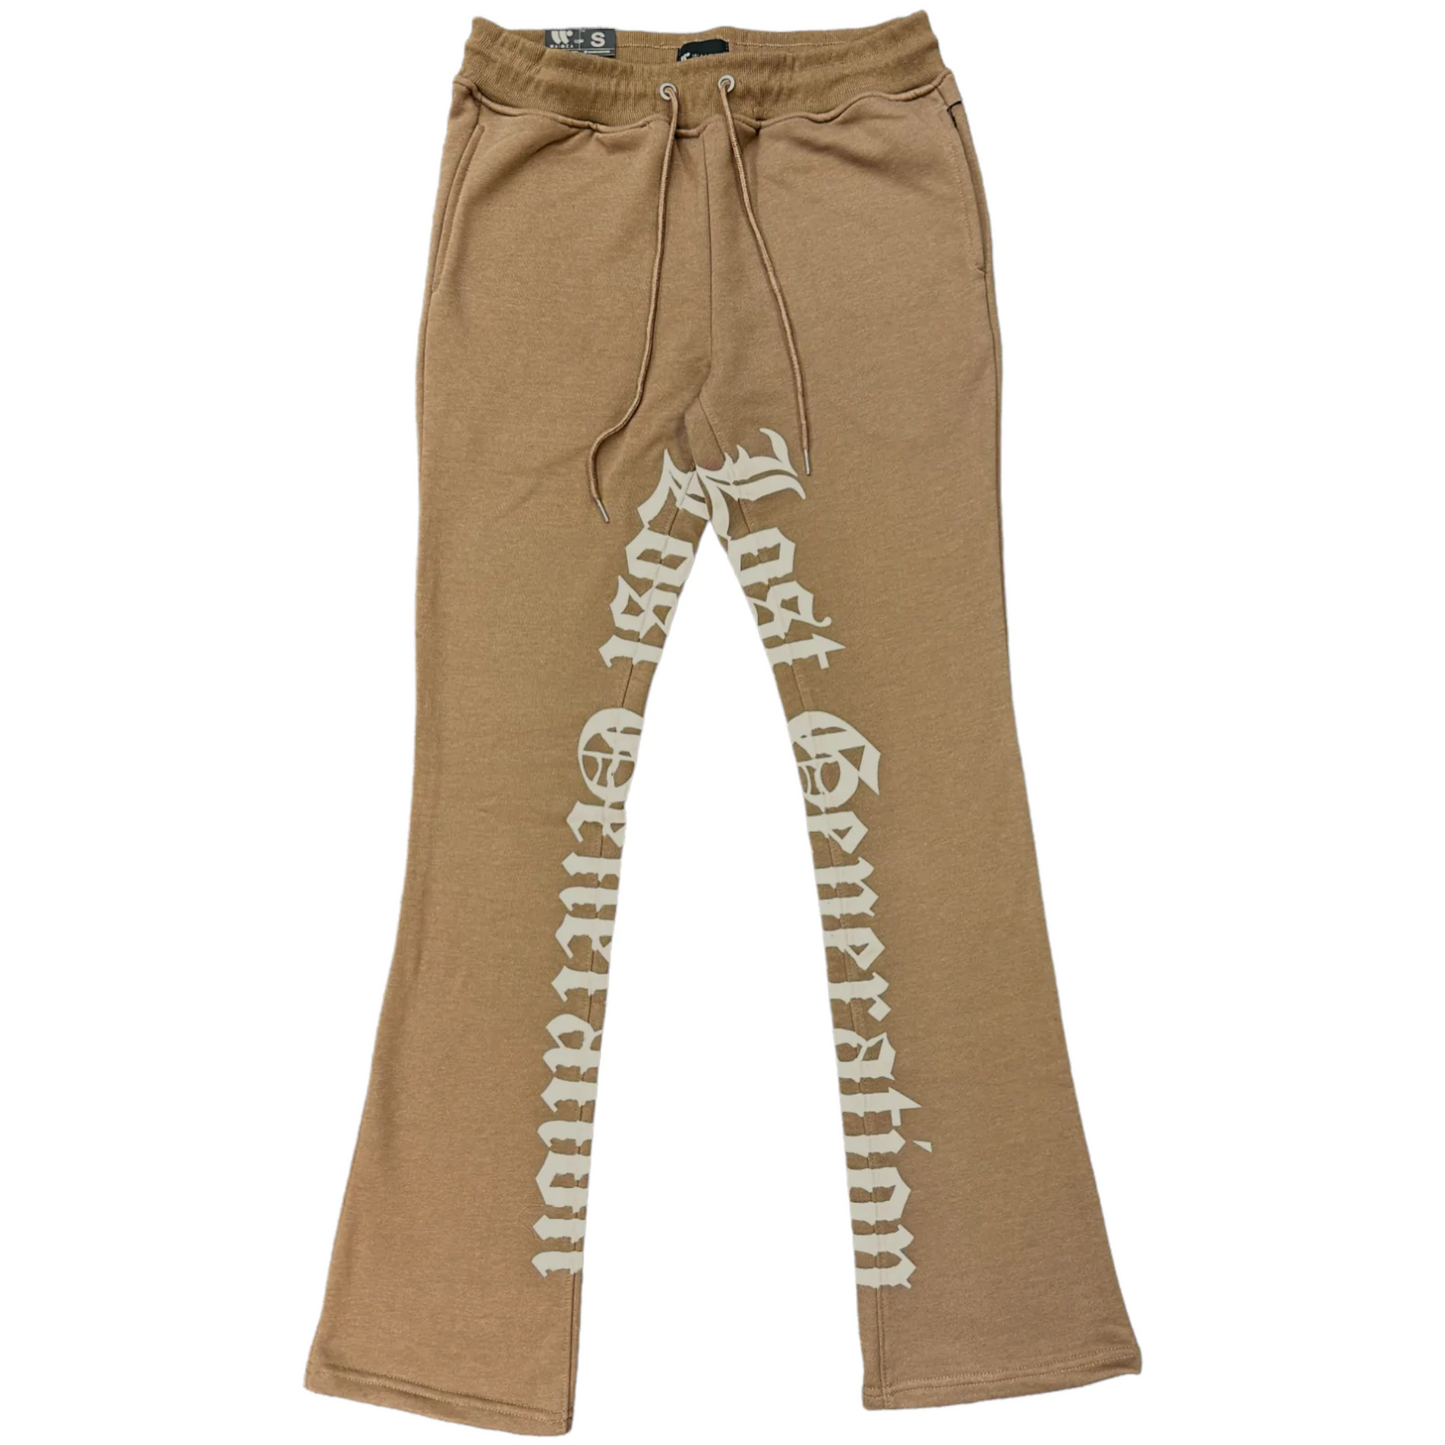 Lost Generation Stacked Sweatpants